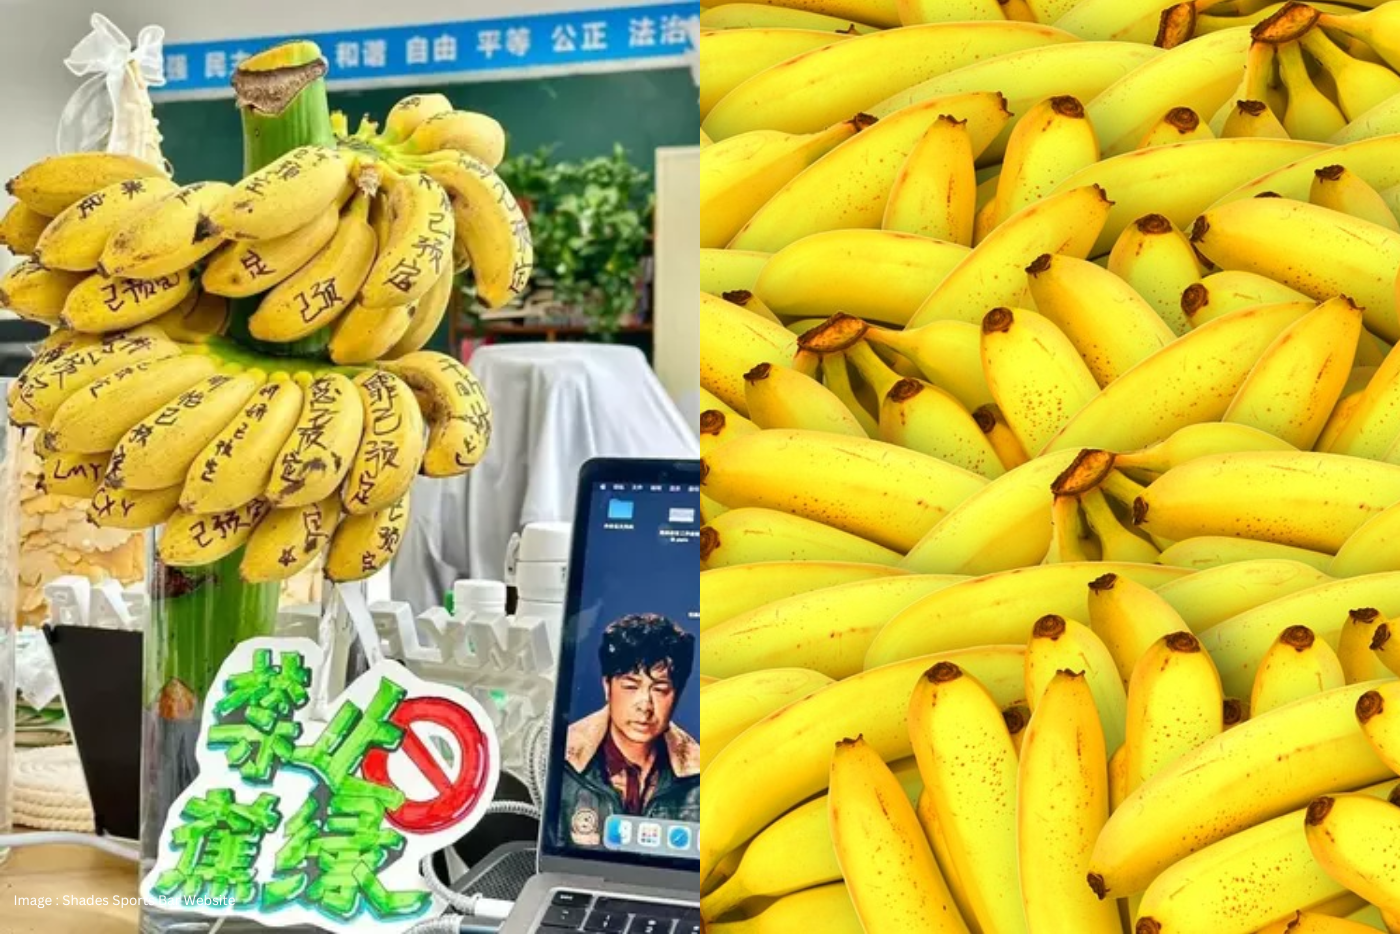 Burned Out Chinese Employees Start ‘Stop Banana Green’ Trend to Fight Office Stress